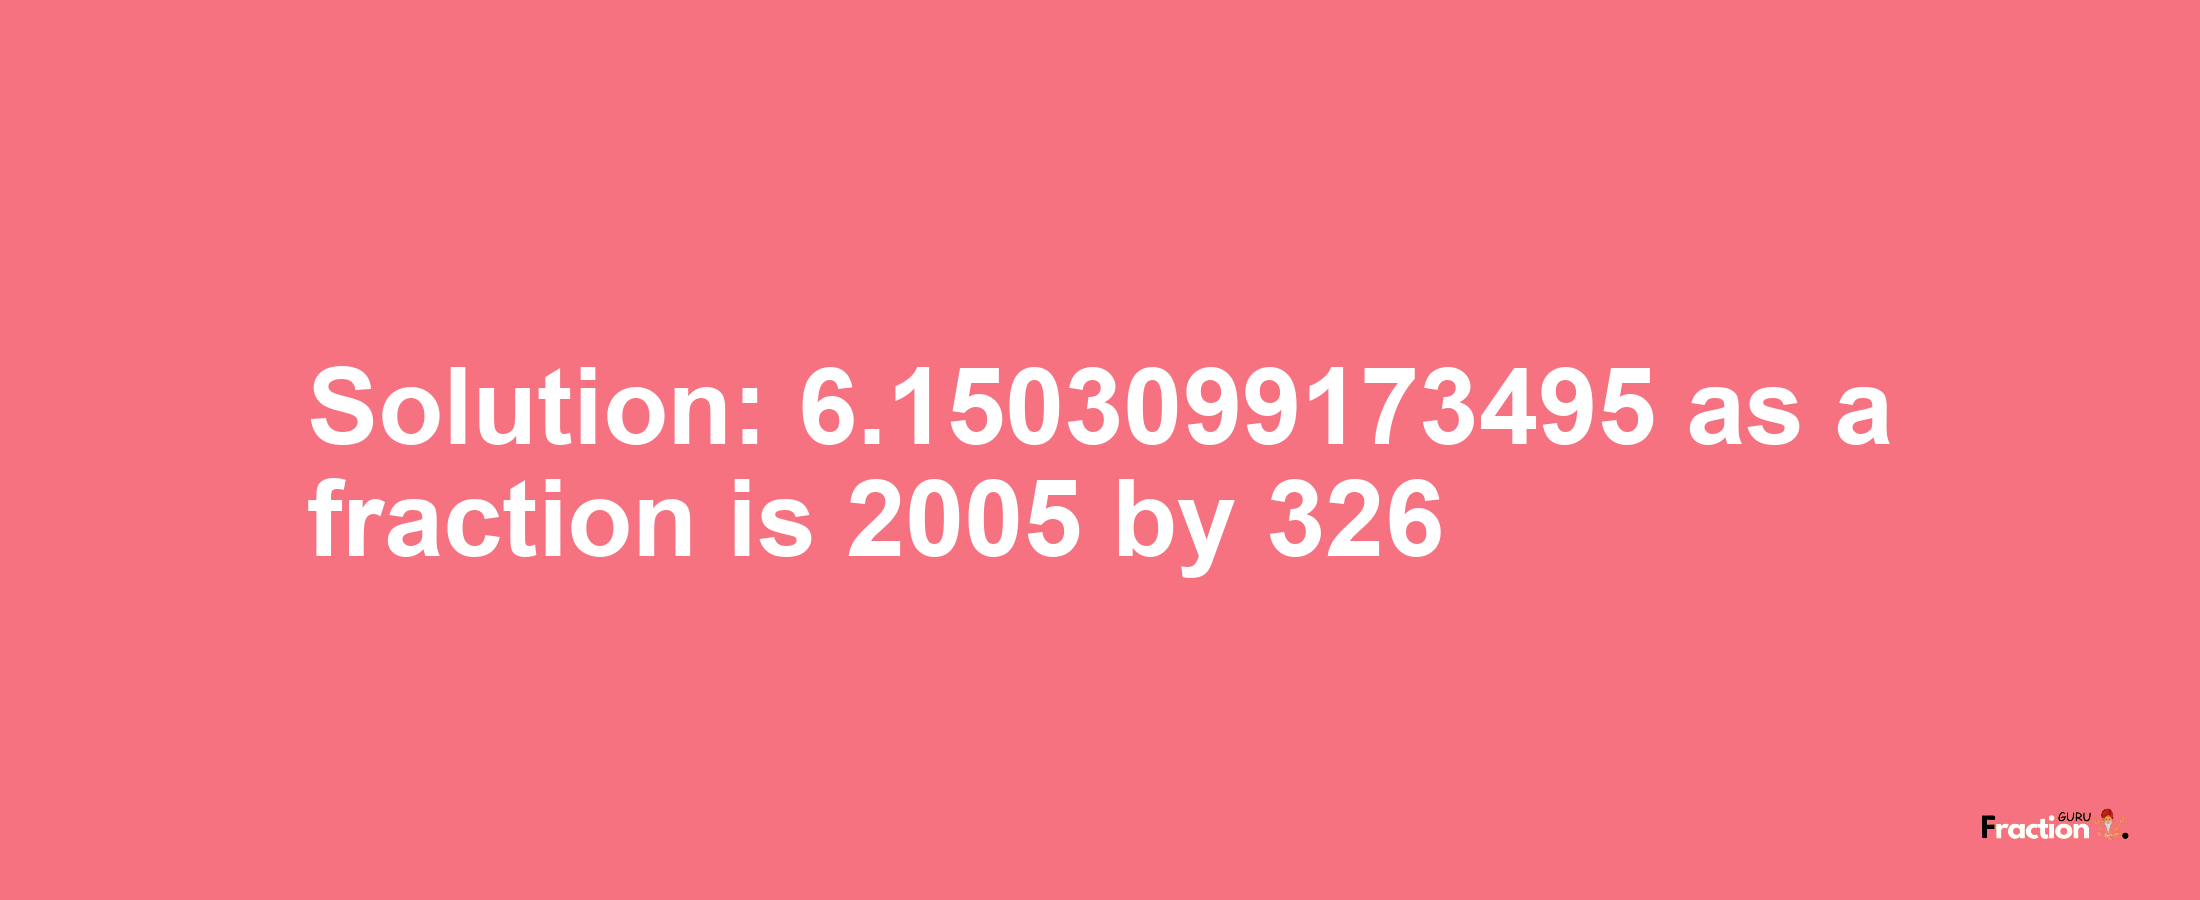 Solution:6.1503099173495 as a fraction is 2005/326